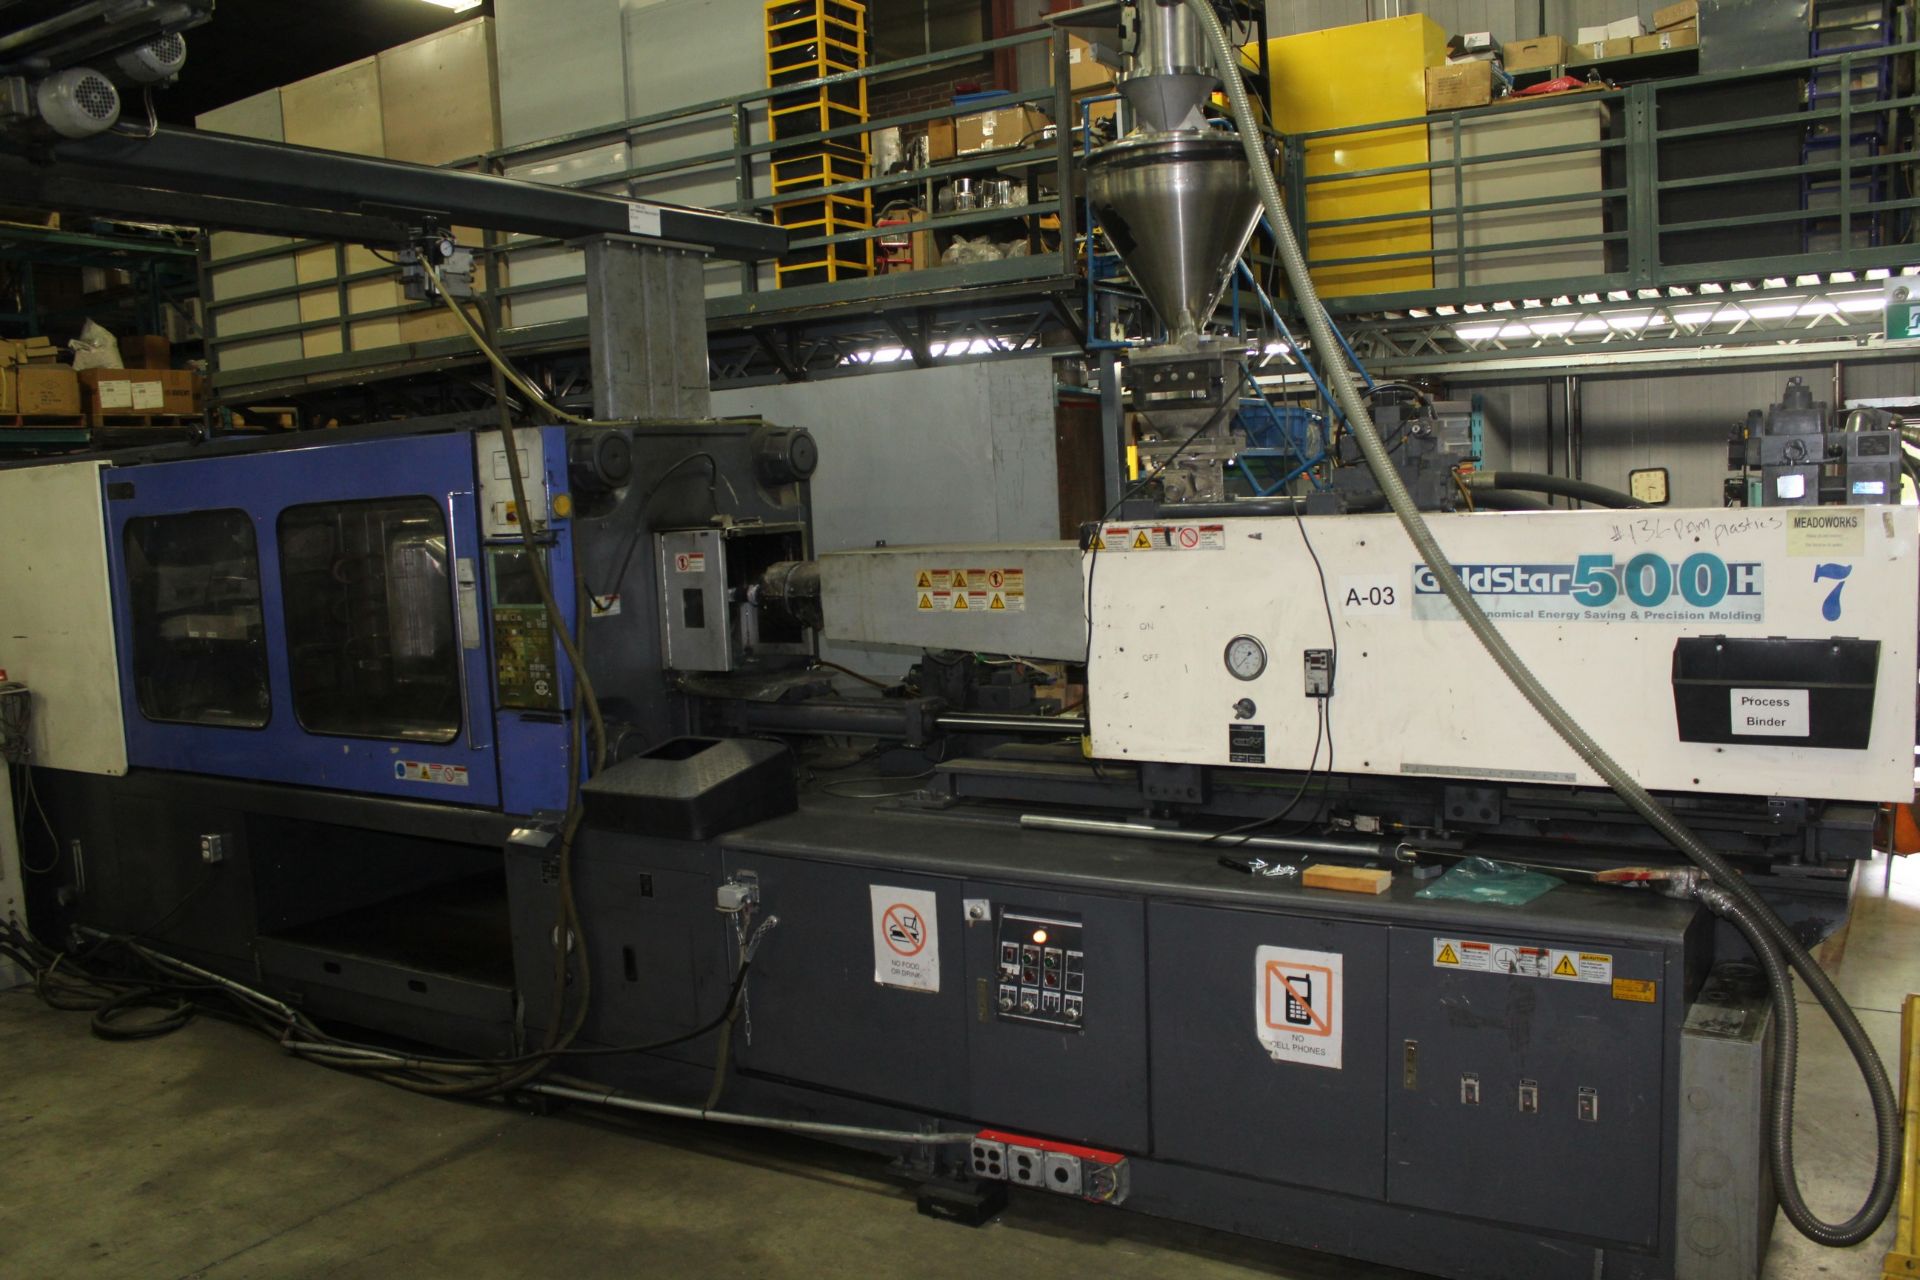 LG GOLD STAR 500H INJECTION MOLDER, 500-TON CAP. - Image 3 of 38